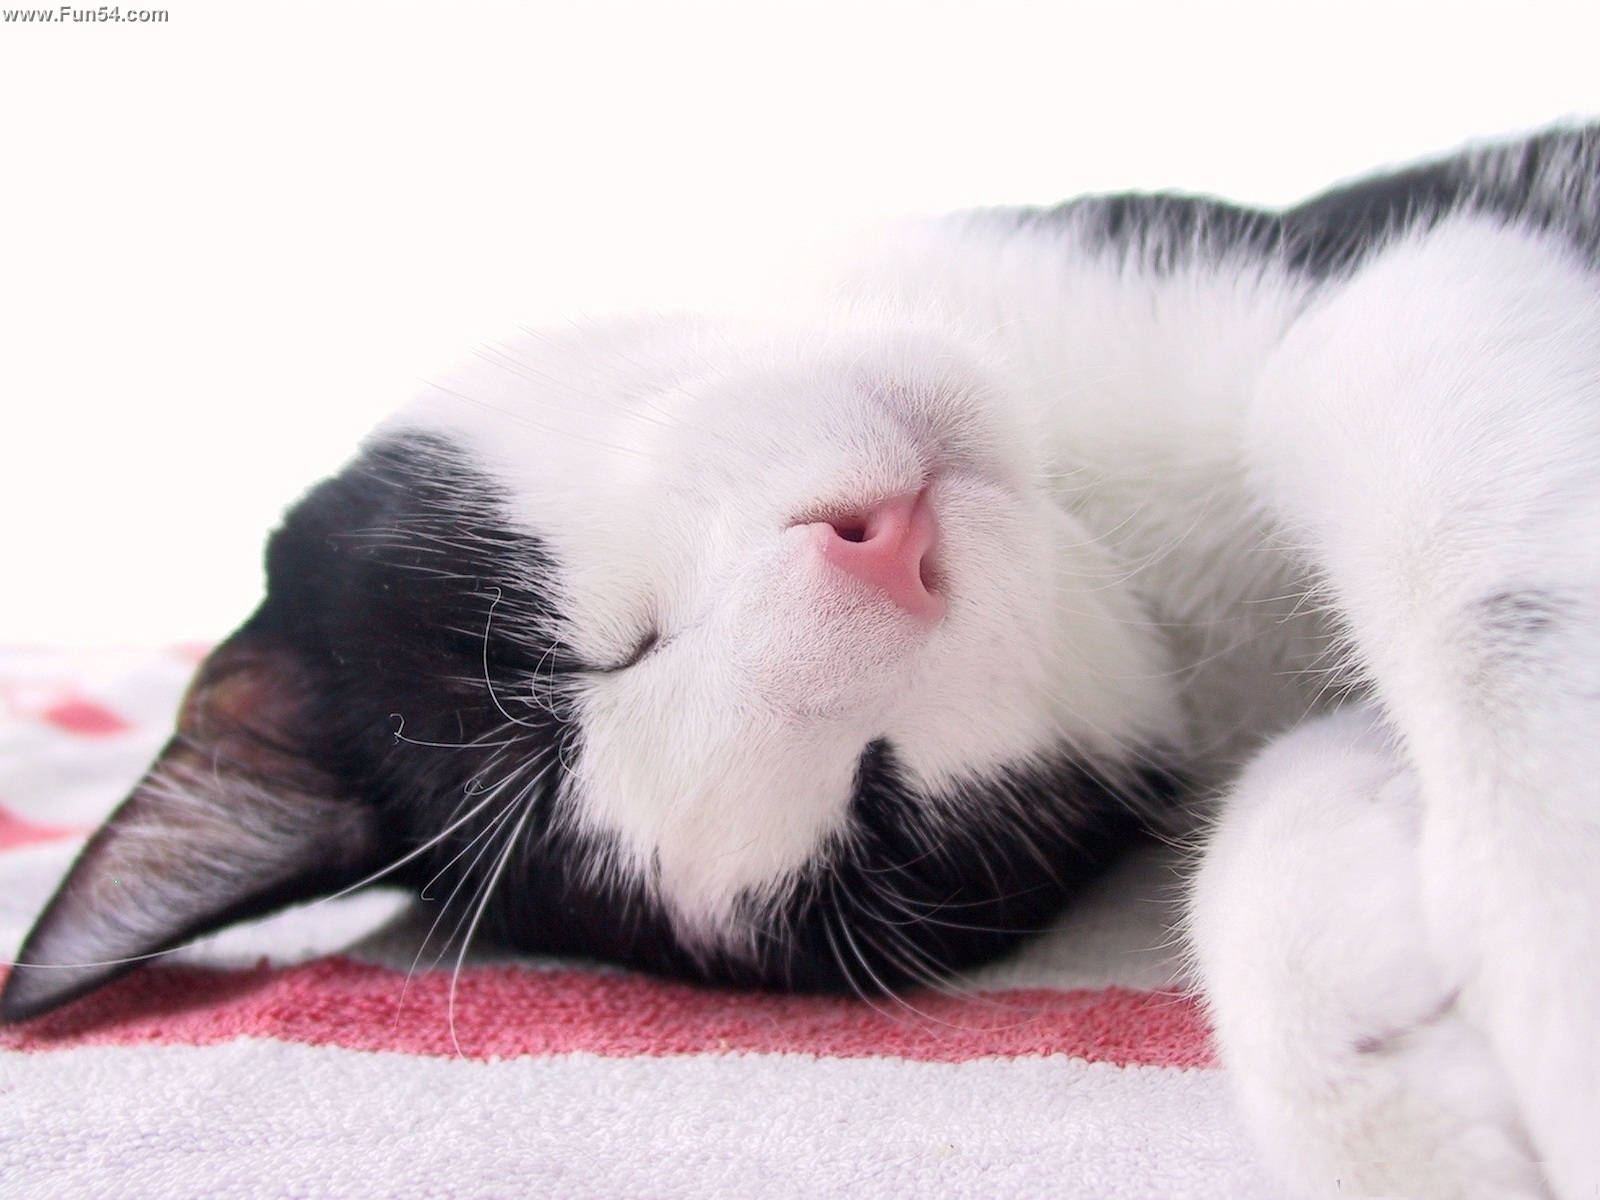 Black And White Cat Sleeping With Head Tilted Wallpaper